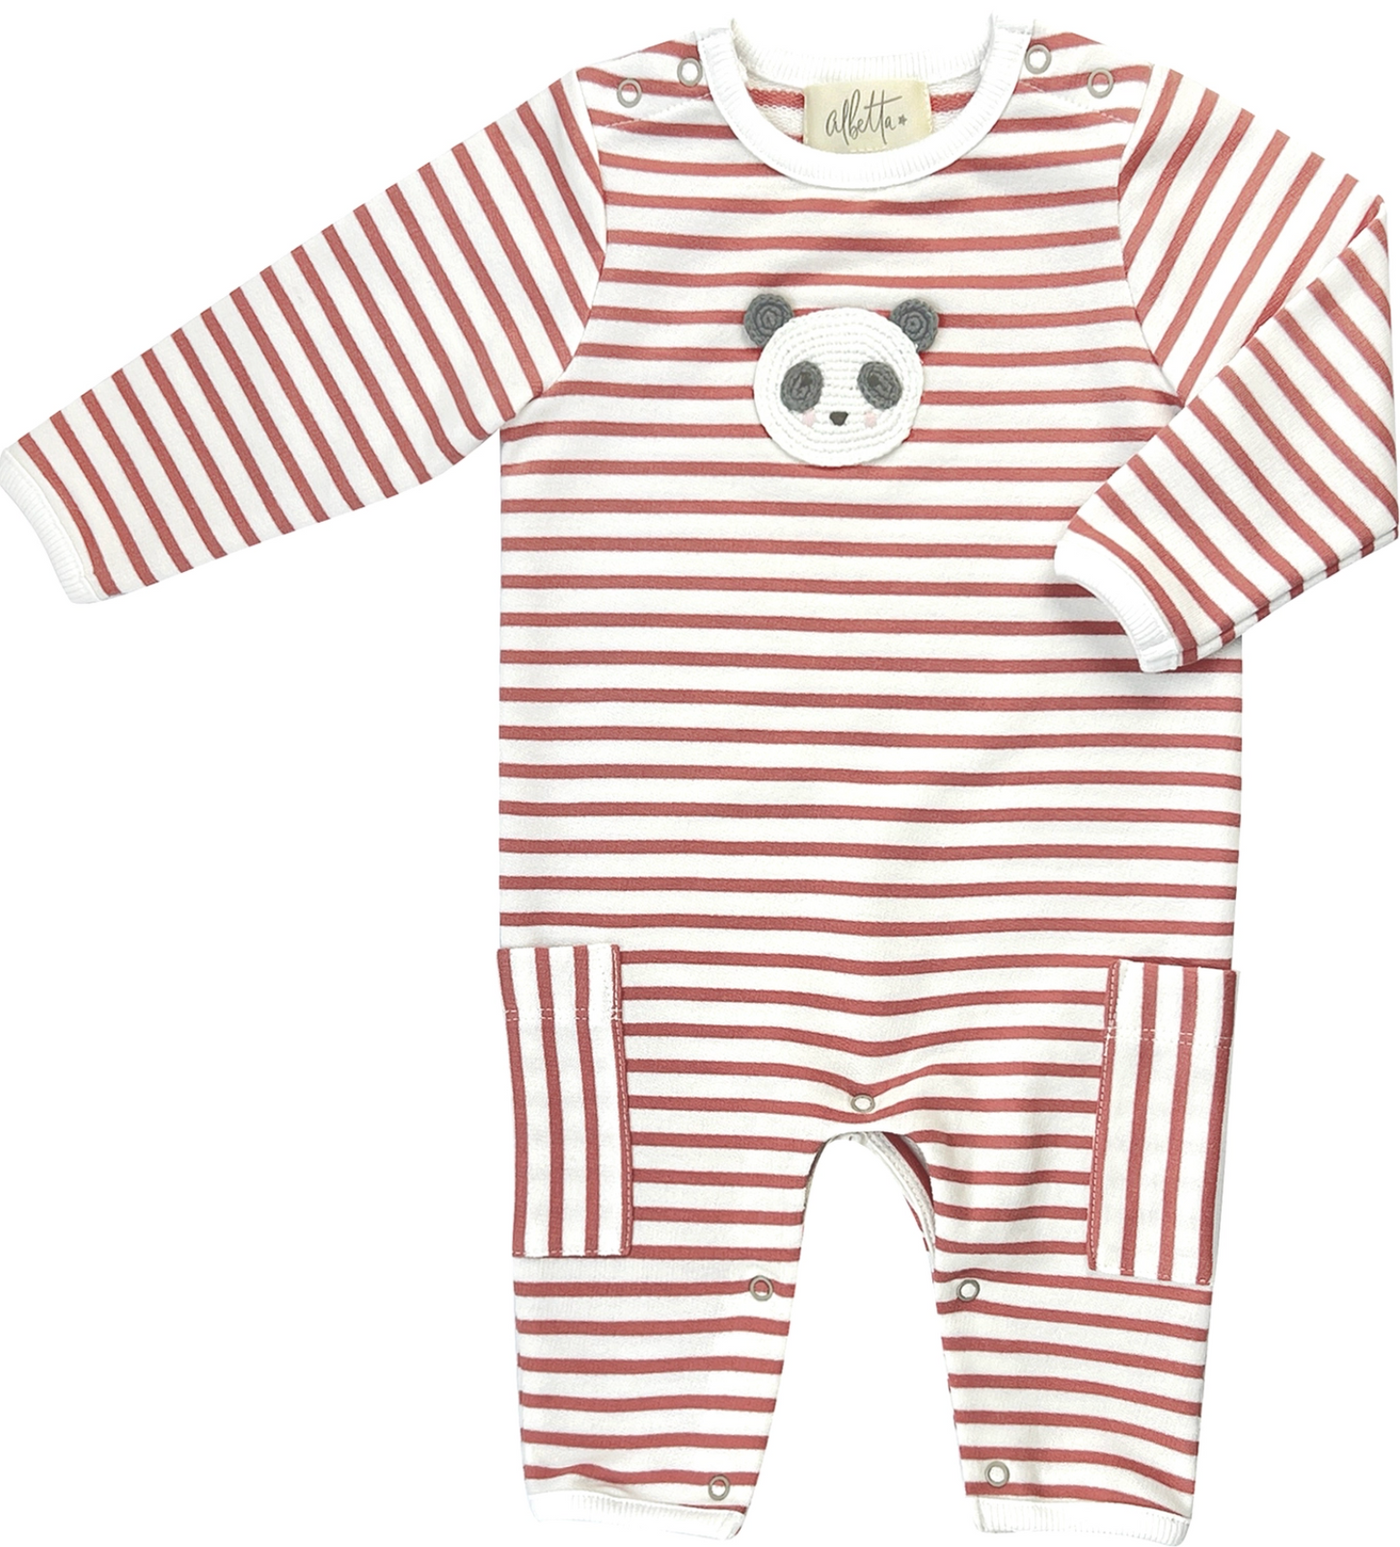 ROMPER PANDA RED/WHITE STRIPE (Available in 2 Sizes)